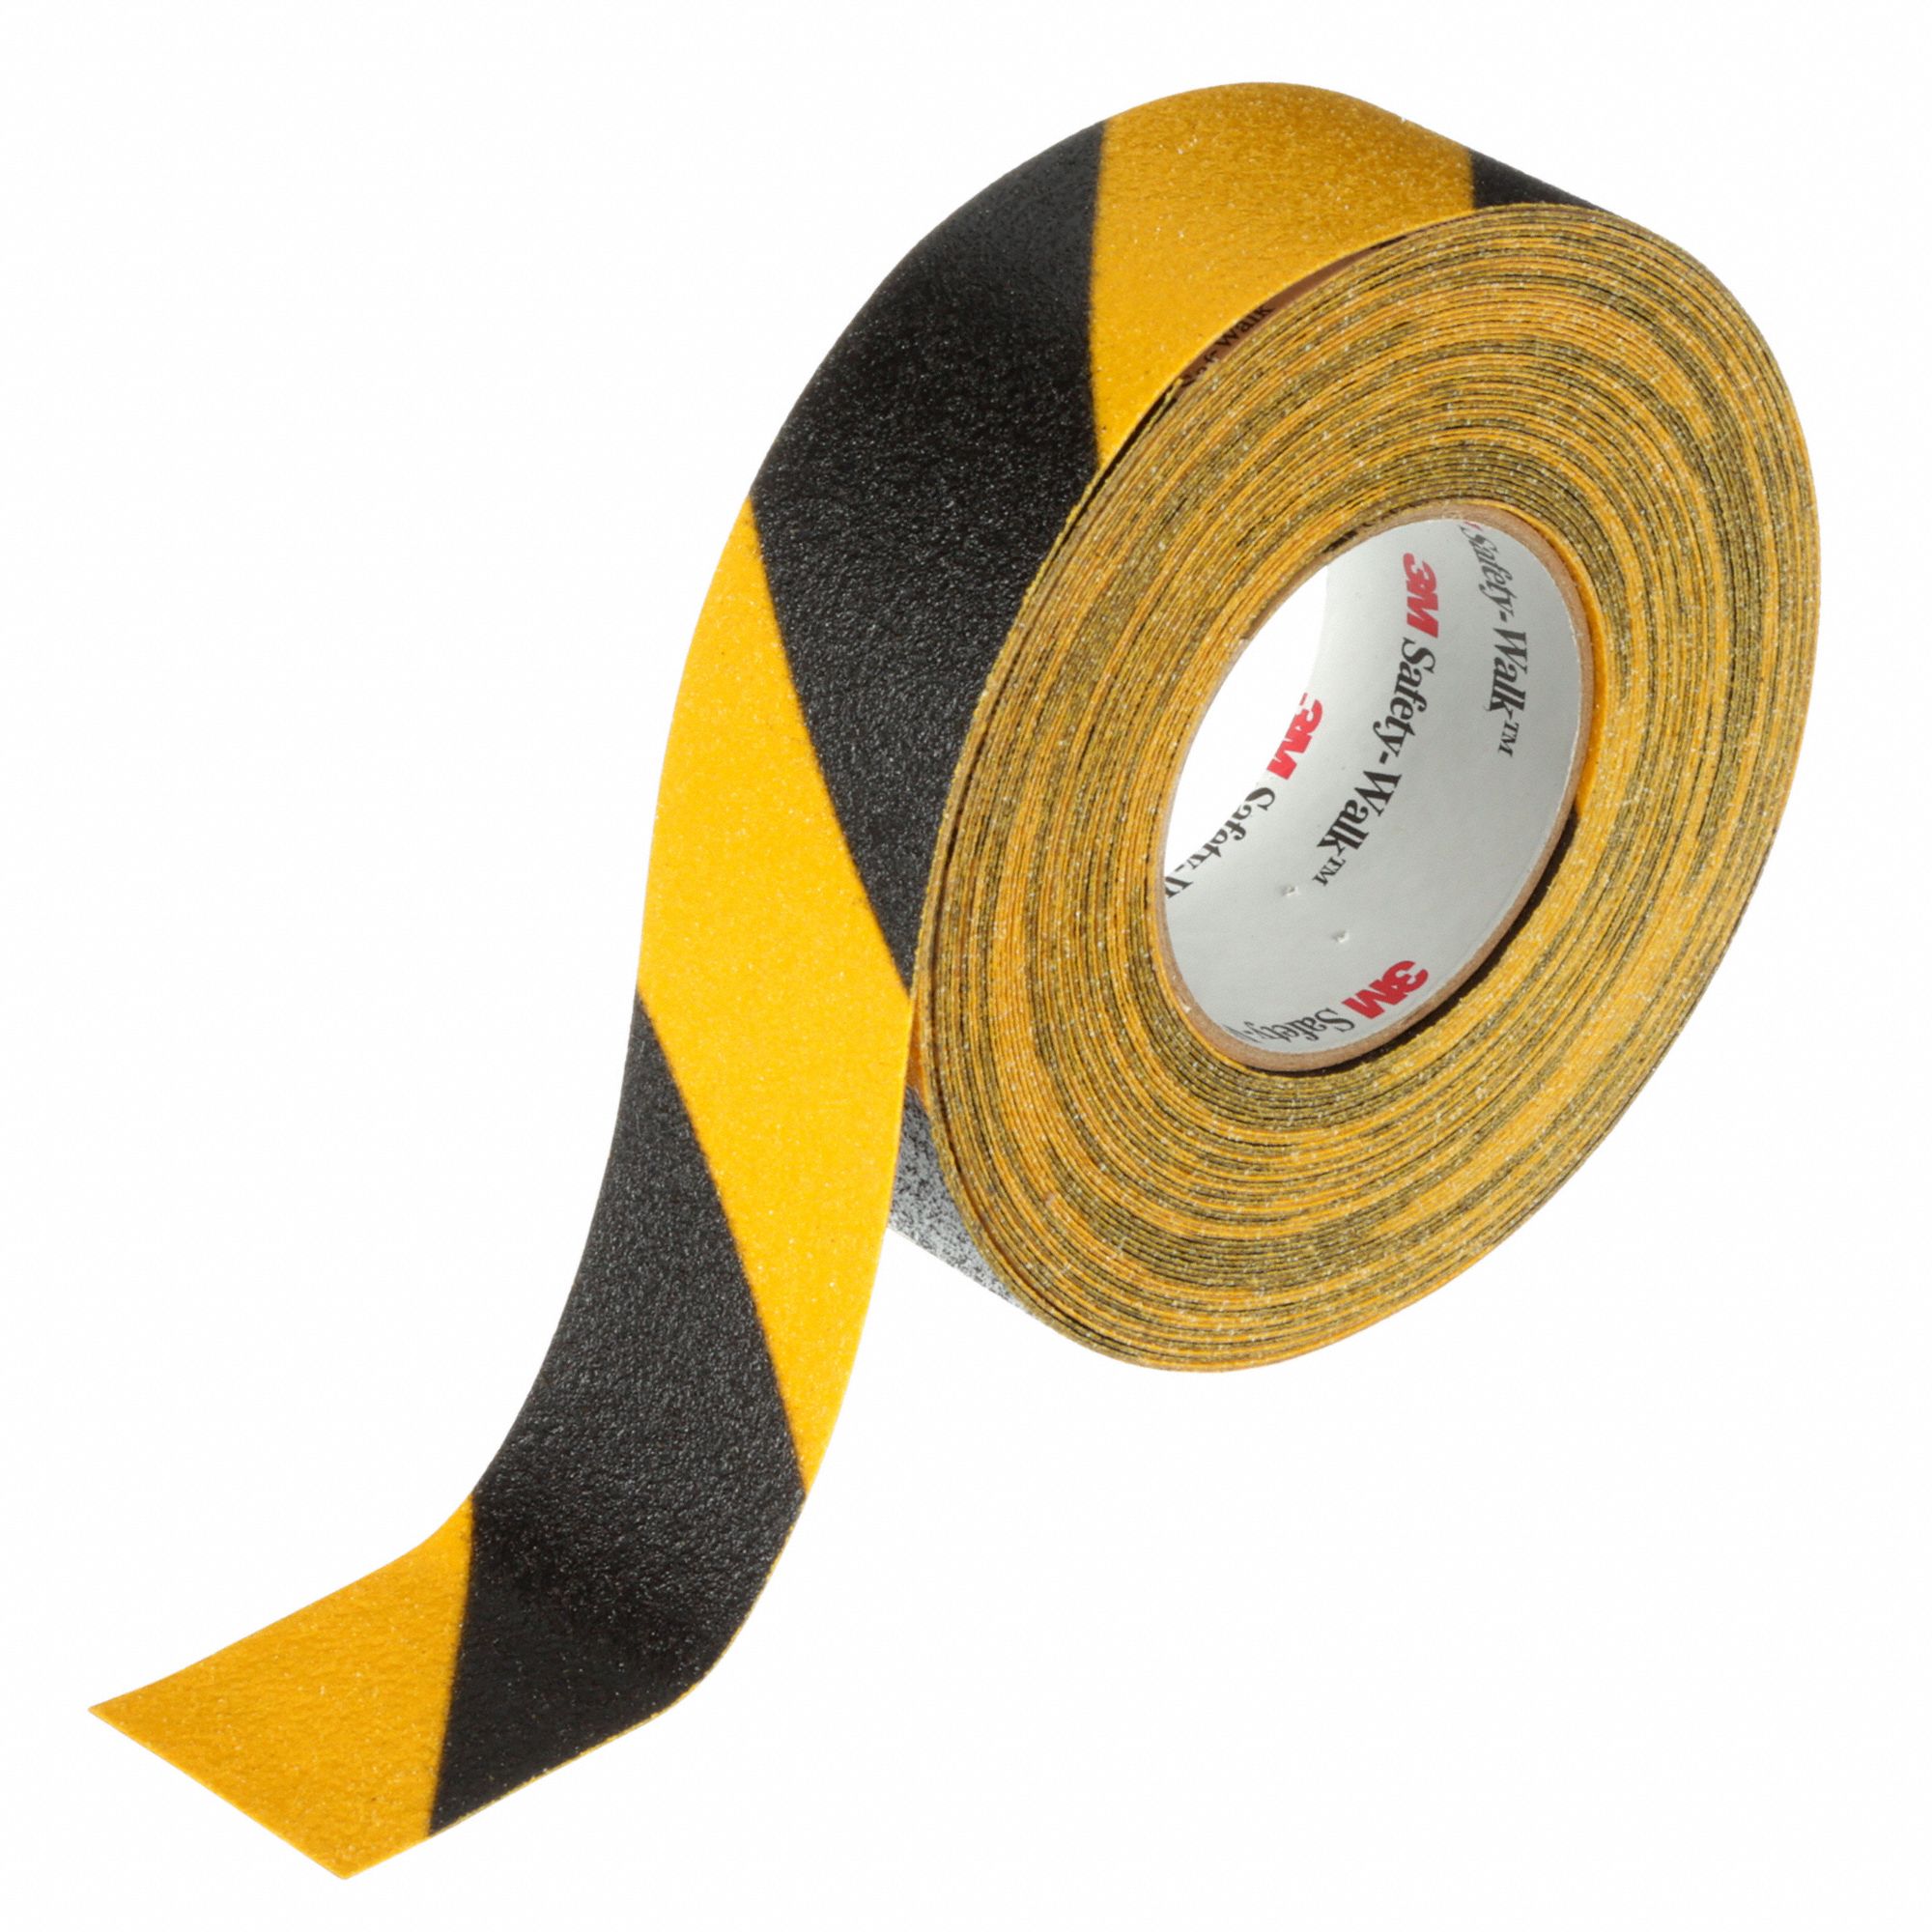 60 Grit Clear Anti Slip 2" X 60FT Adhesive 2 Rolls Non Skid Tape 